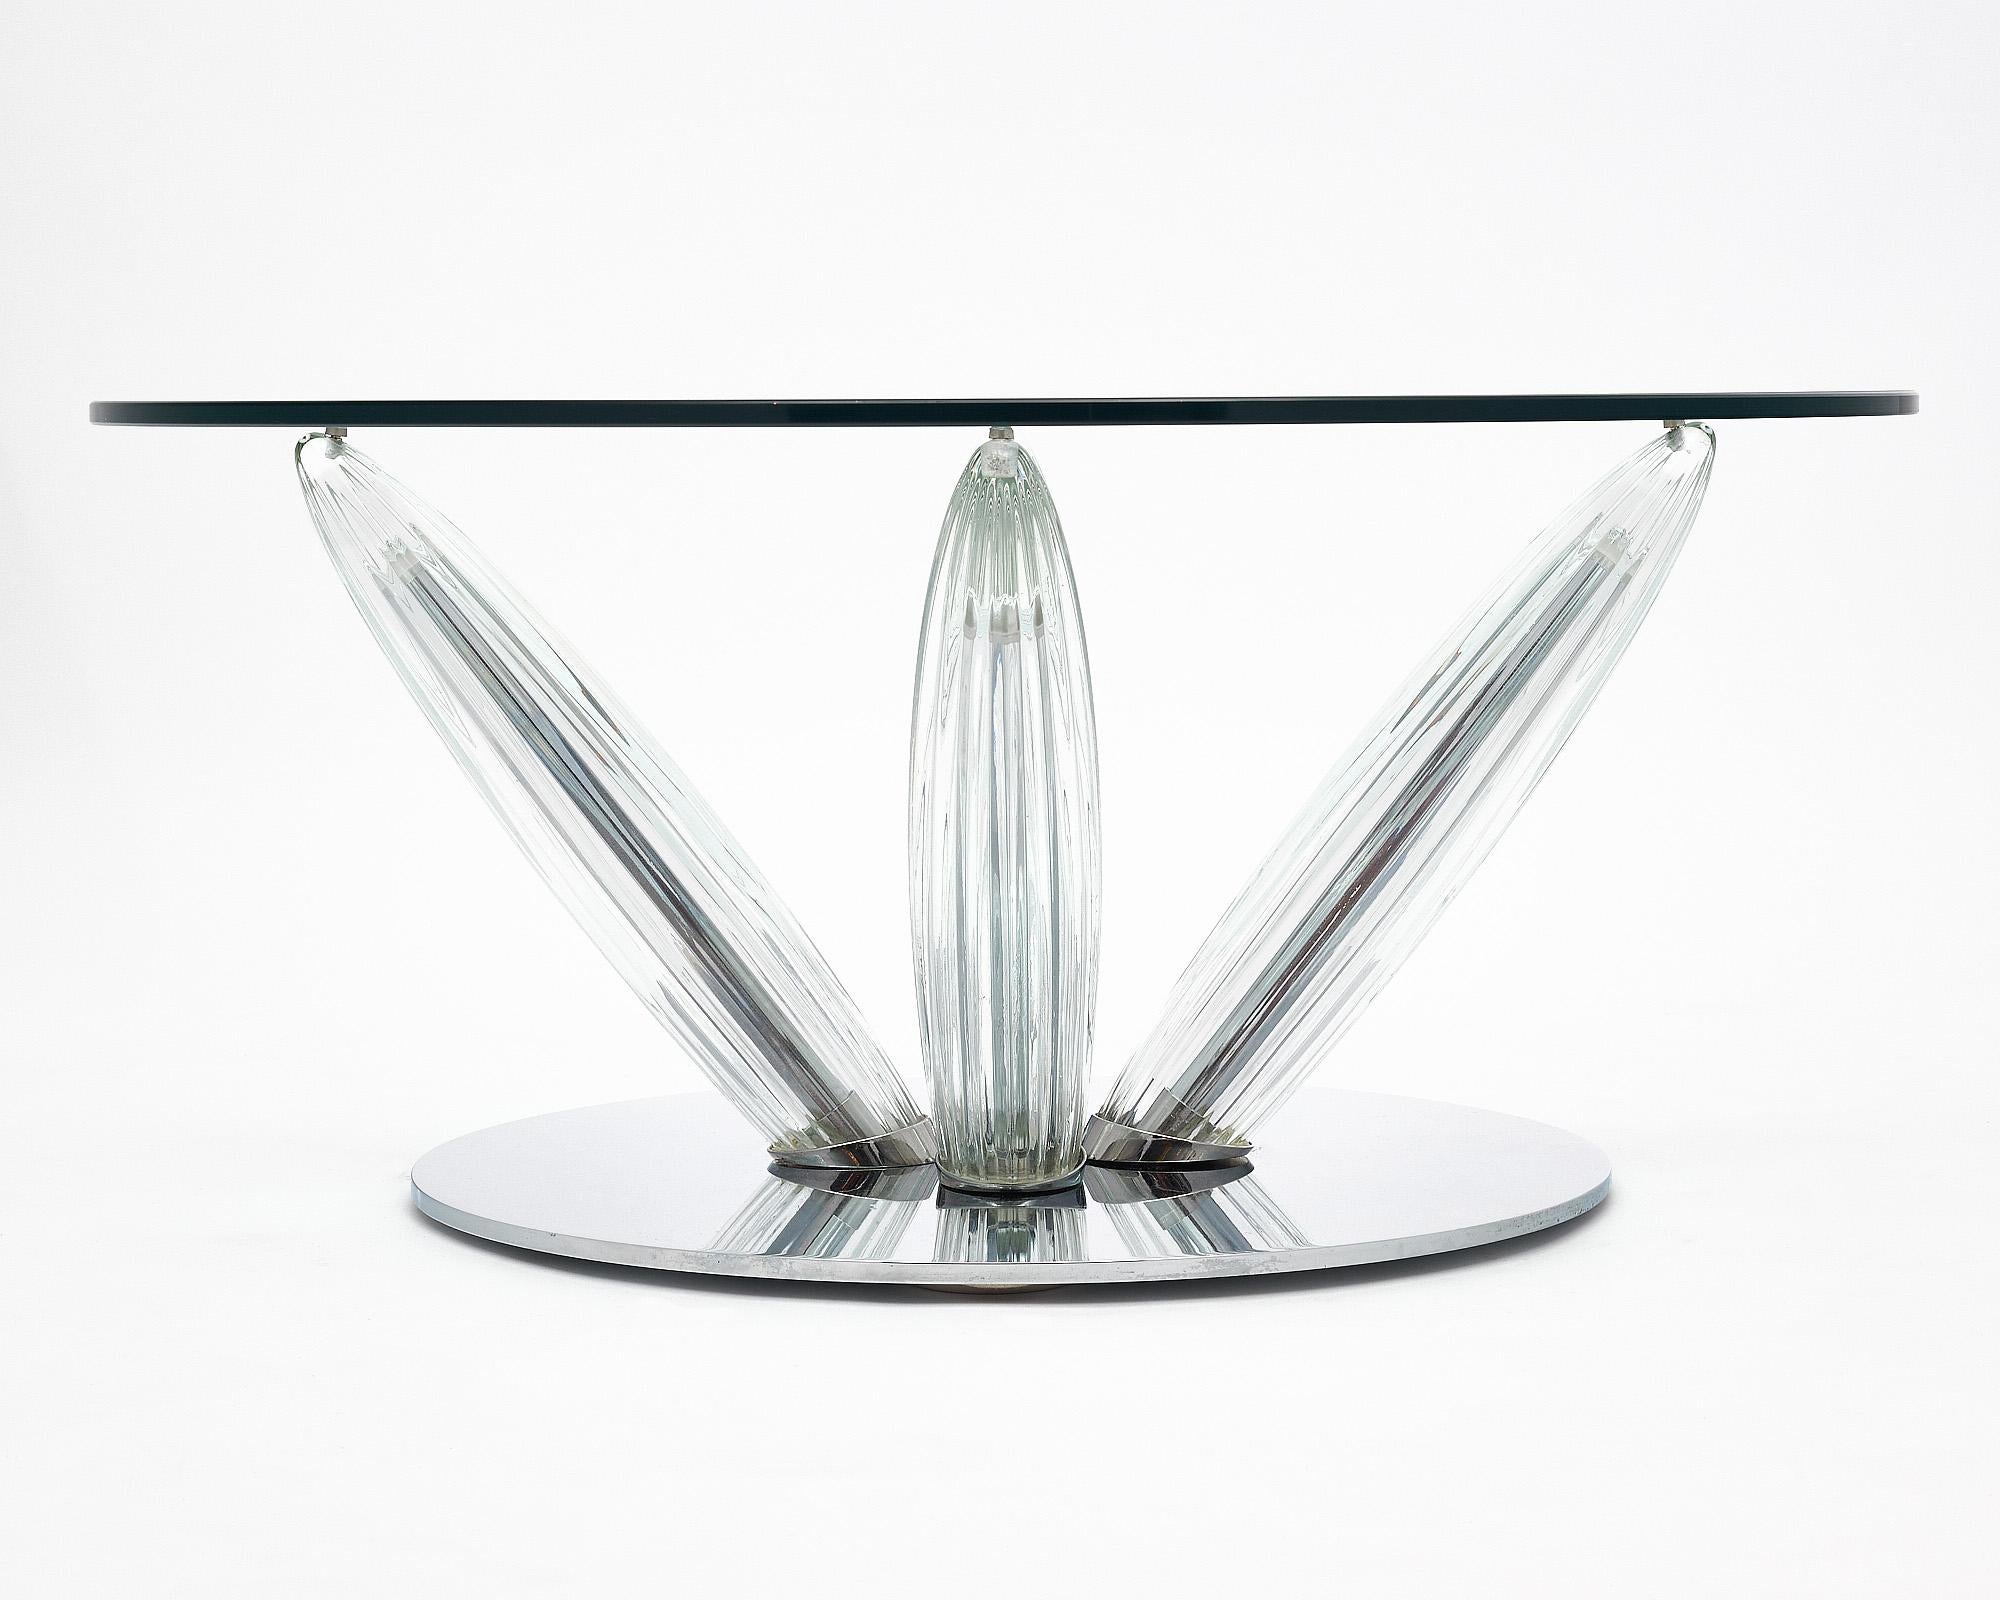 Coffee table from France made by iconic brand Roche Bobois. This piece has a glass circular top that sits supported by four thick glass covered legs that taper down to a chrome circular base. The glass is signed.
